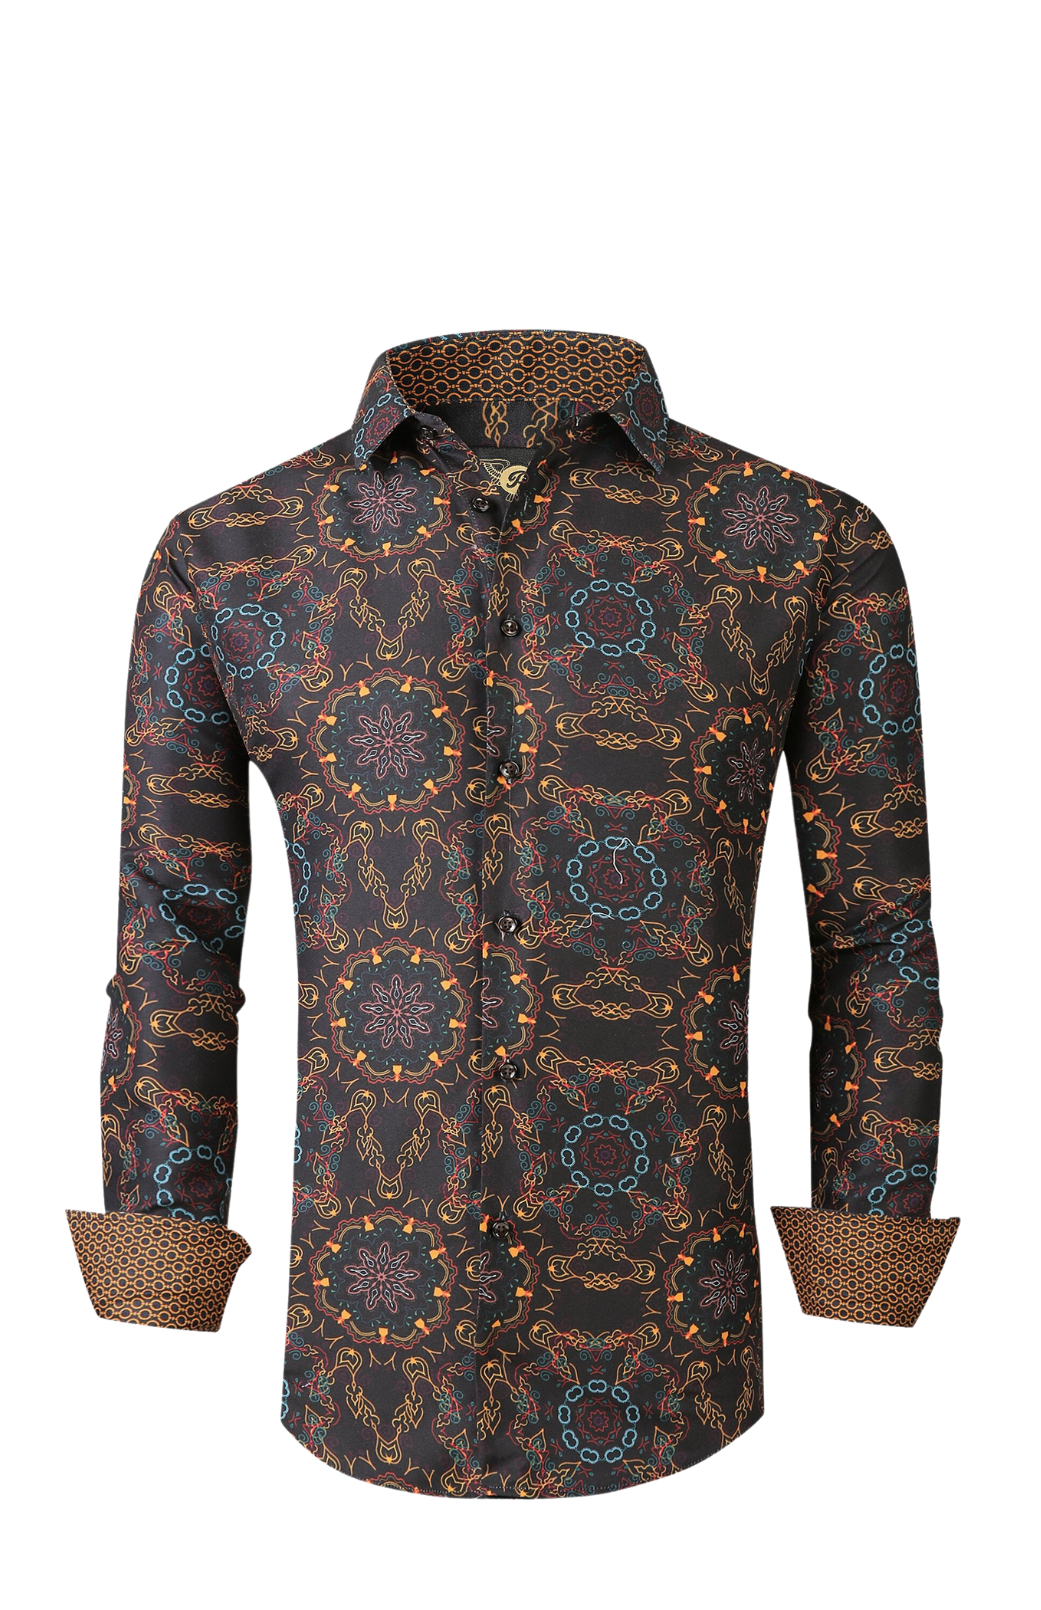 Mens PREMIERE Long Sleeve Button Down Dress Shirt MULTI COLOR ABSTRACT CHAIN